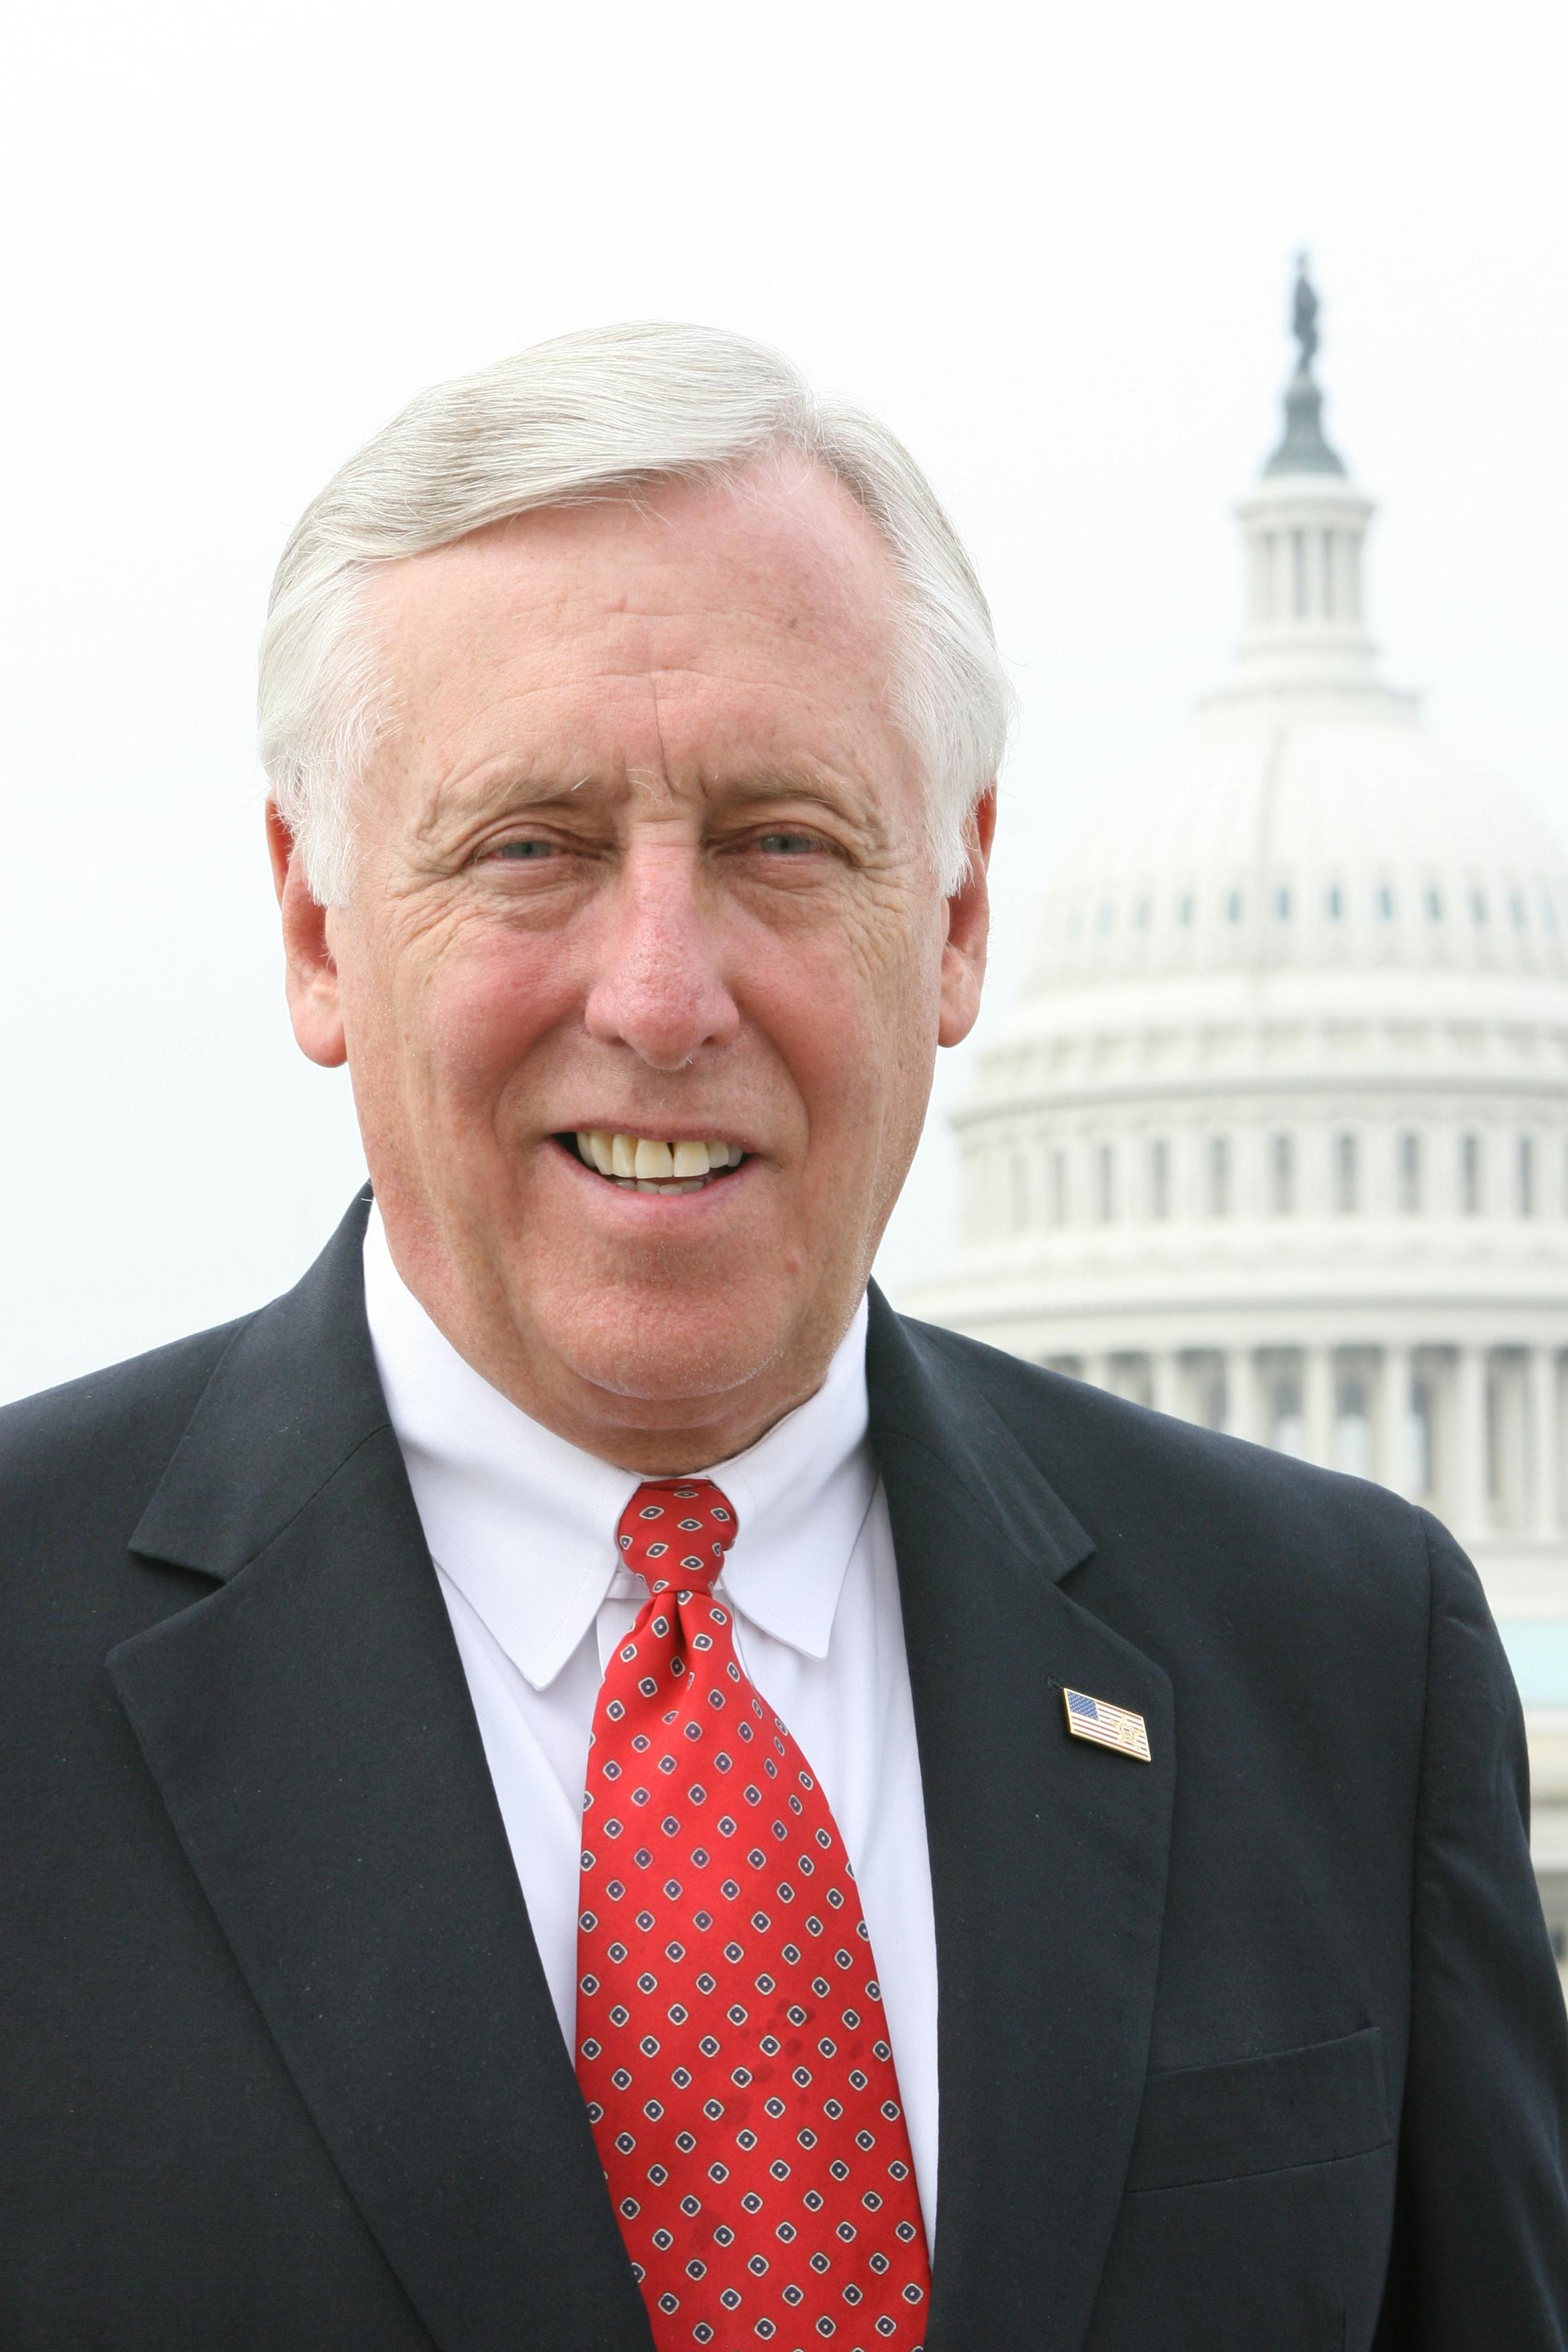 Profile picture of Steny Hoyer